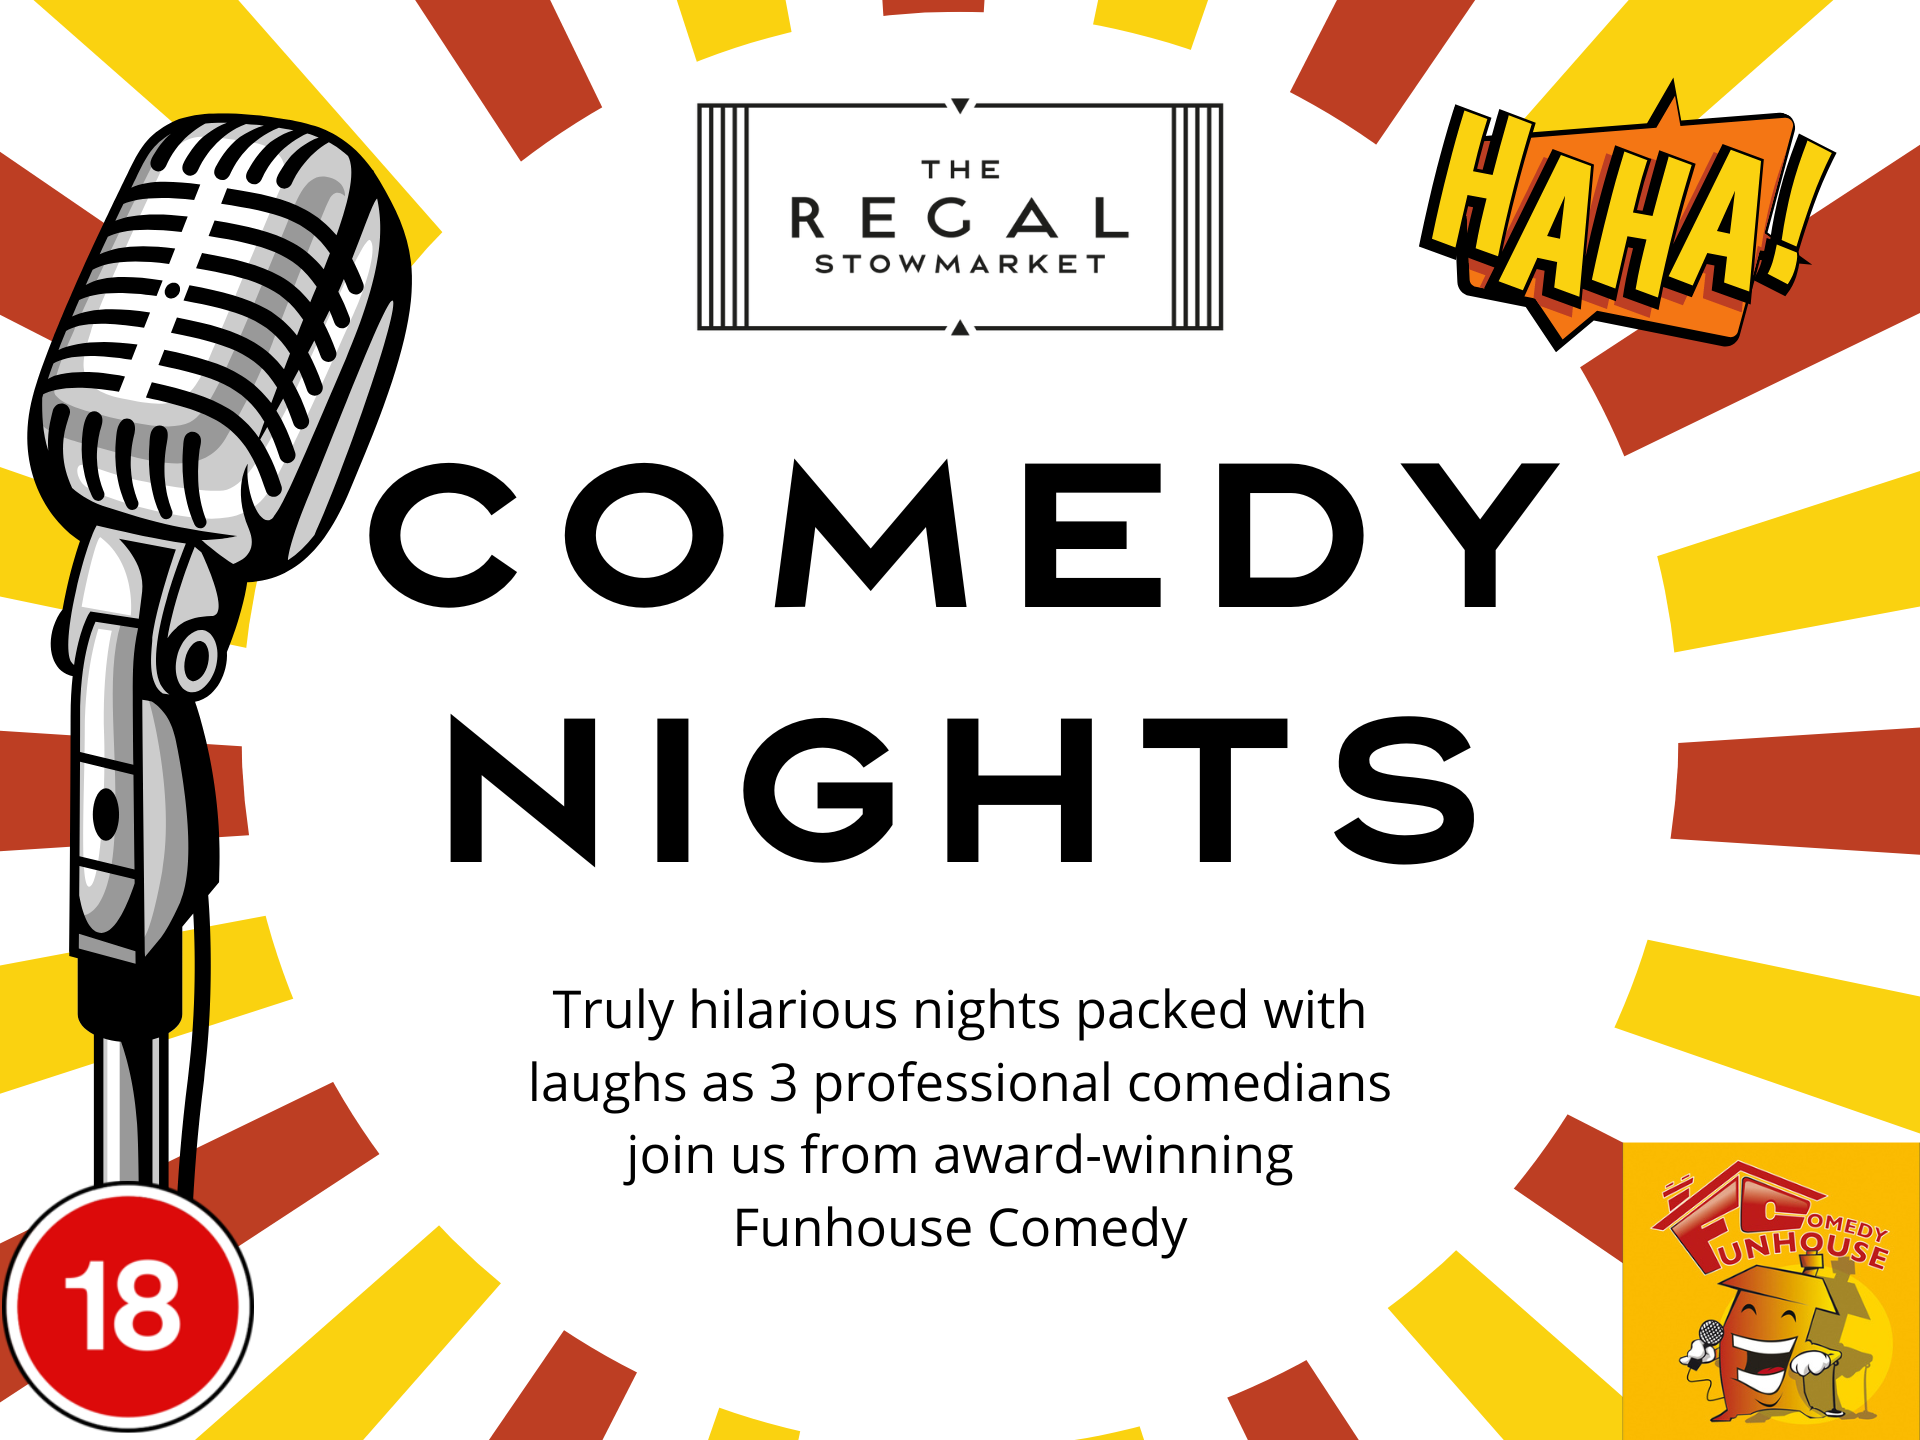 Comedy Nights at The Regal